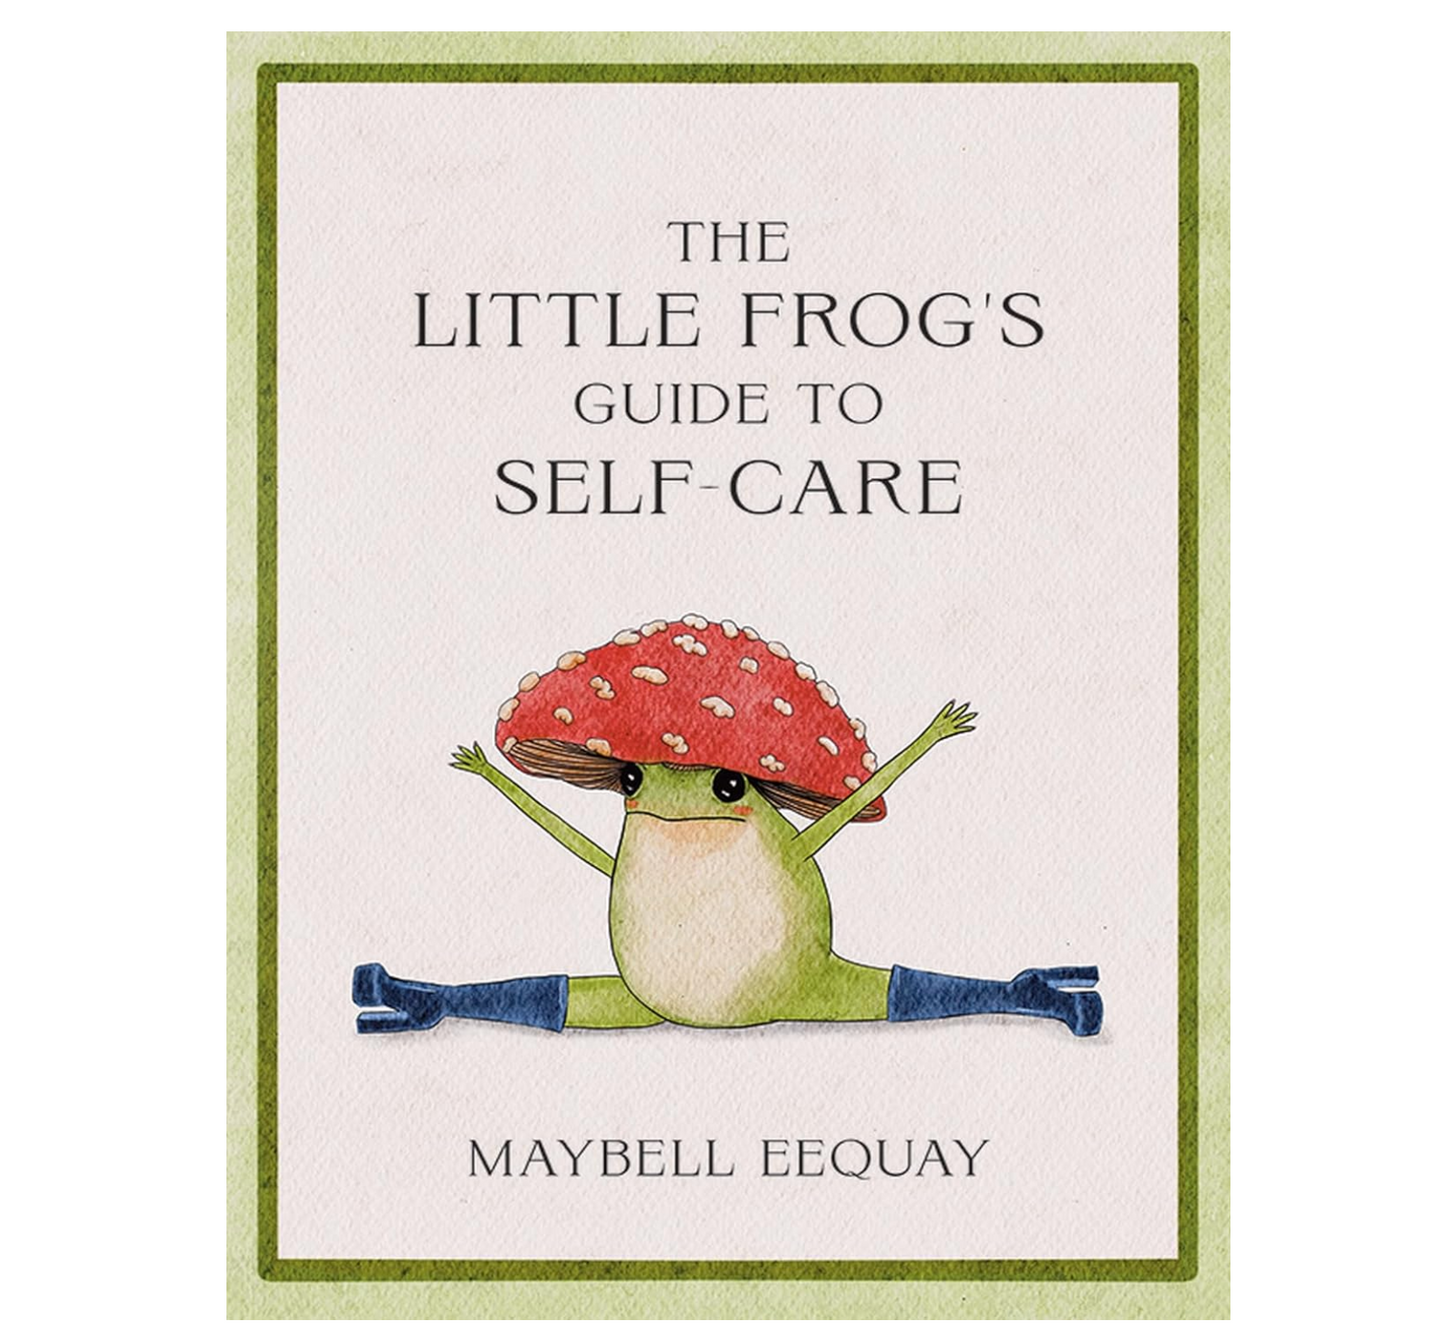 The Little Frog's Guide To Self-Care Book - 96 pages